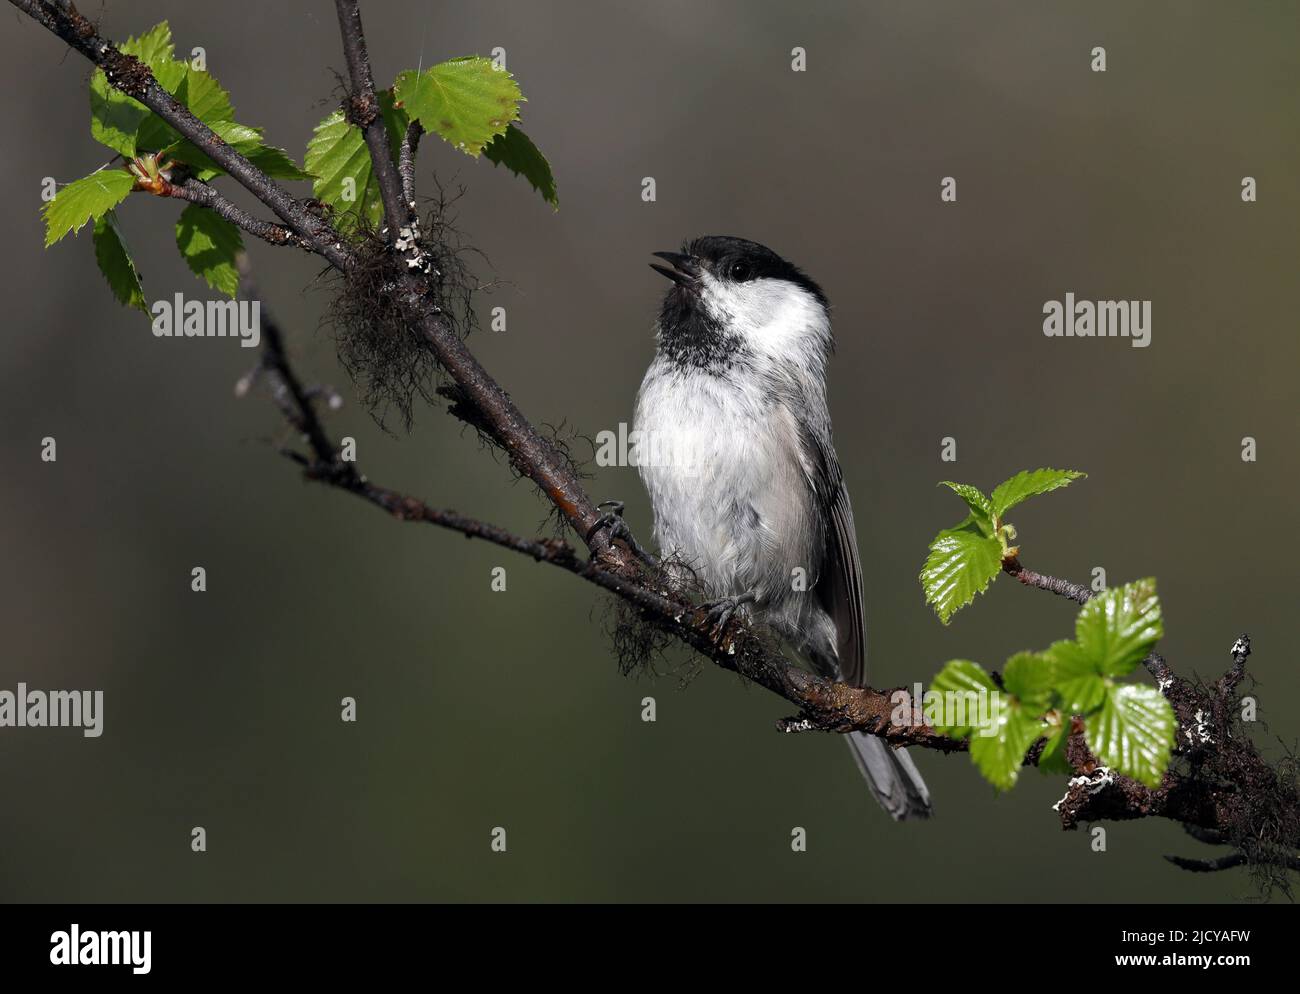 Willow tit, poecile montagus, sitting on birch twig with green leaves Stock Photo